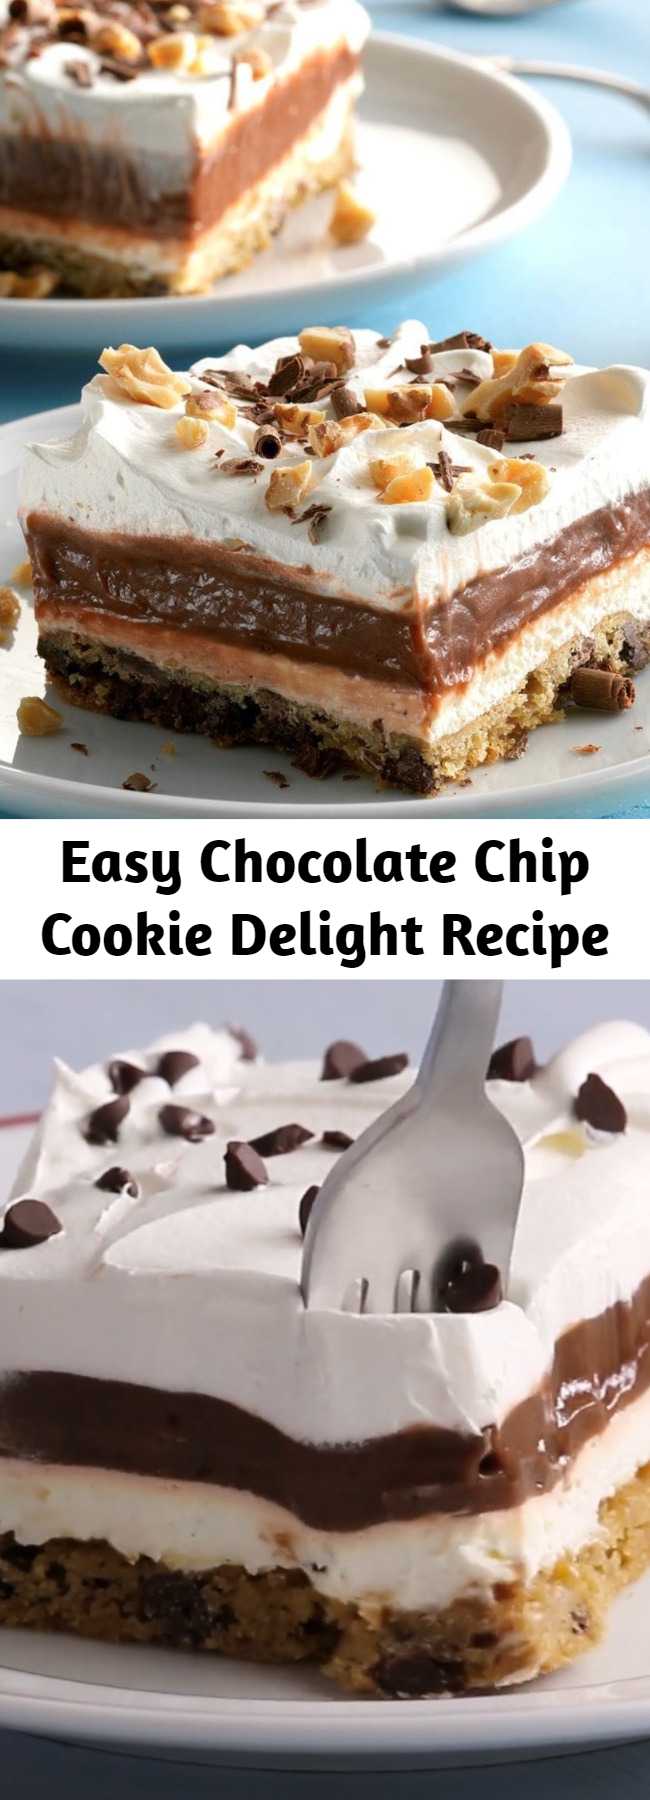 Easy Chocolate Chip Cookie Delight Recipe - Simple Chocolate Chip Cookie Delight Recipe - This is a simple chocolate delight recipe for any type of potluck occasion, and the pan always comes home empty.